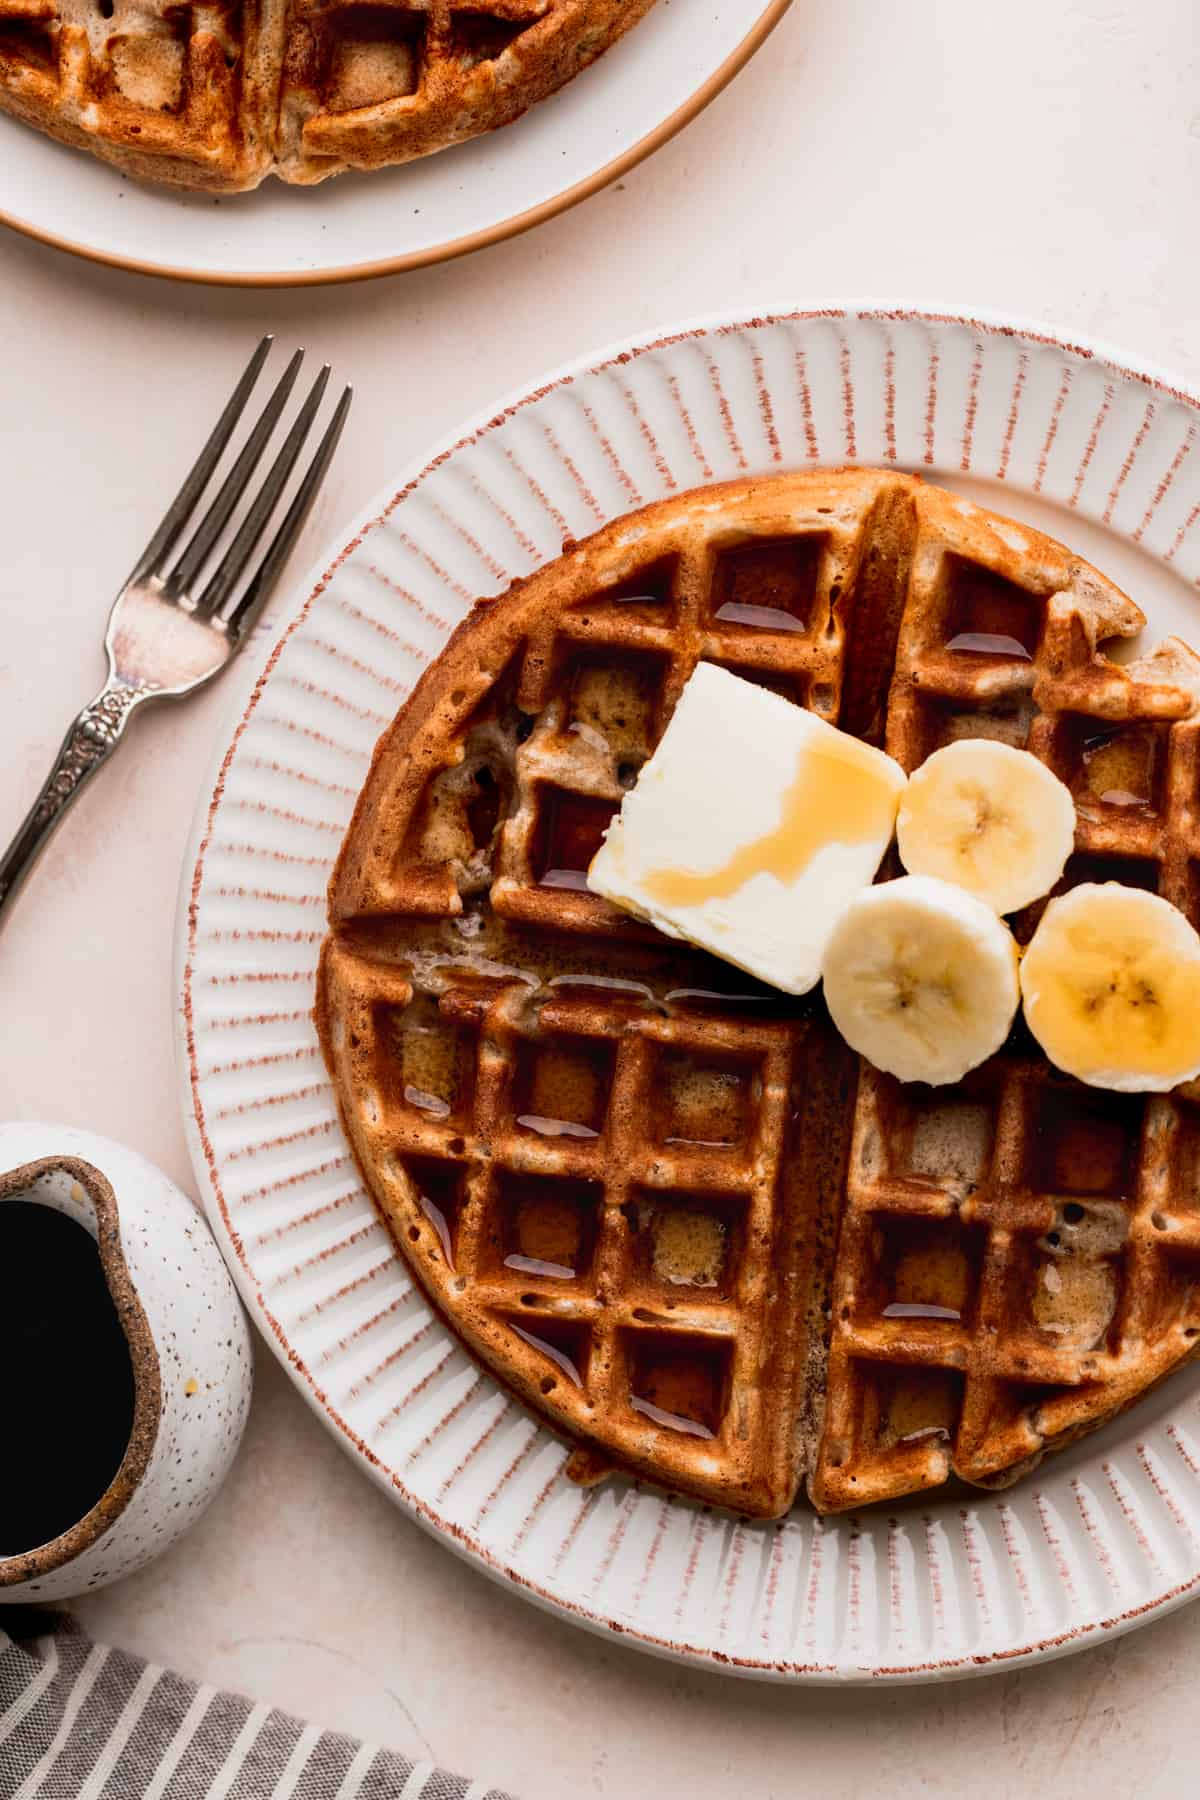 Banana waffles on a plate topped with butter, syrup, and bananas.